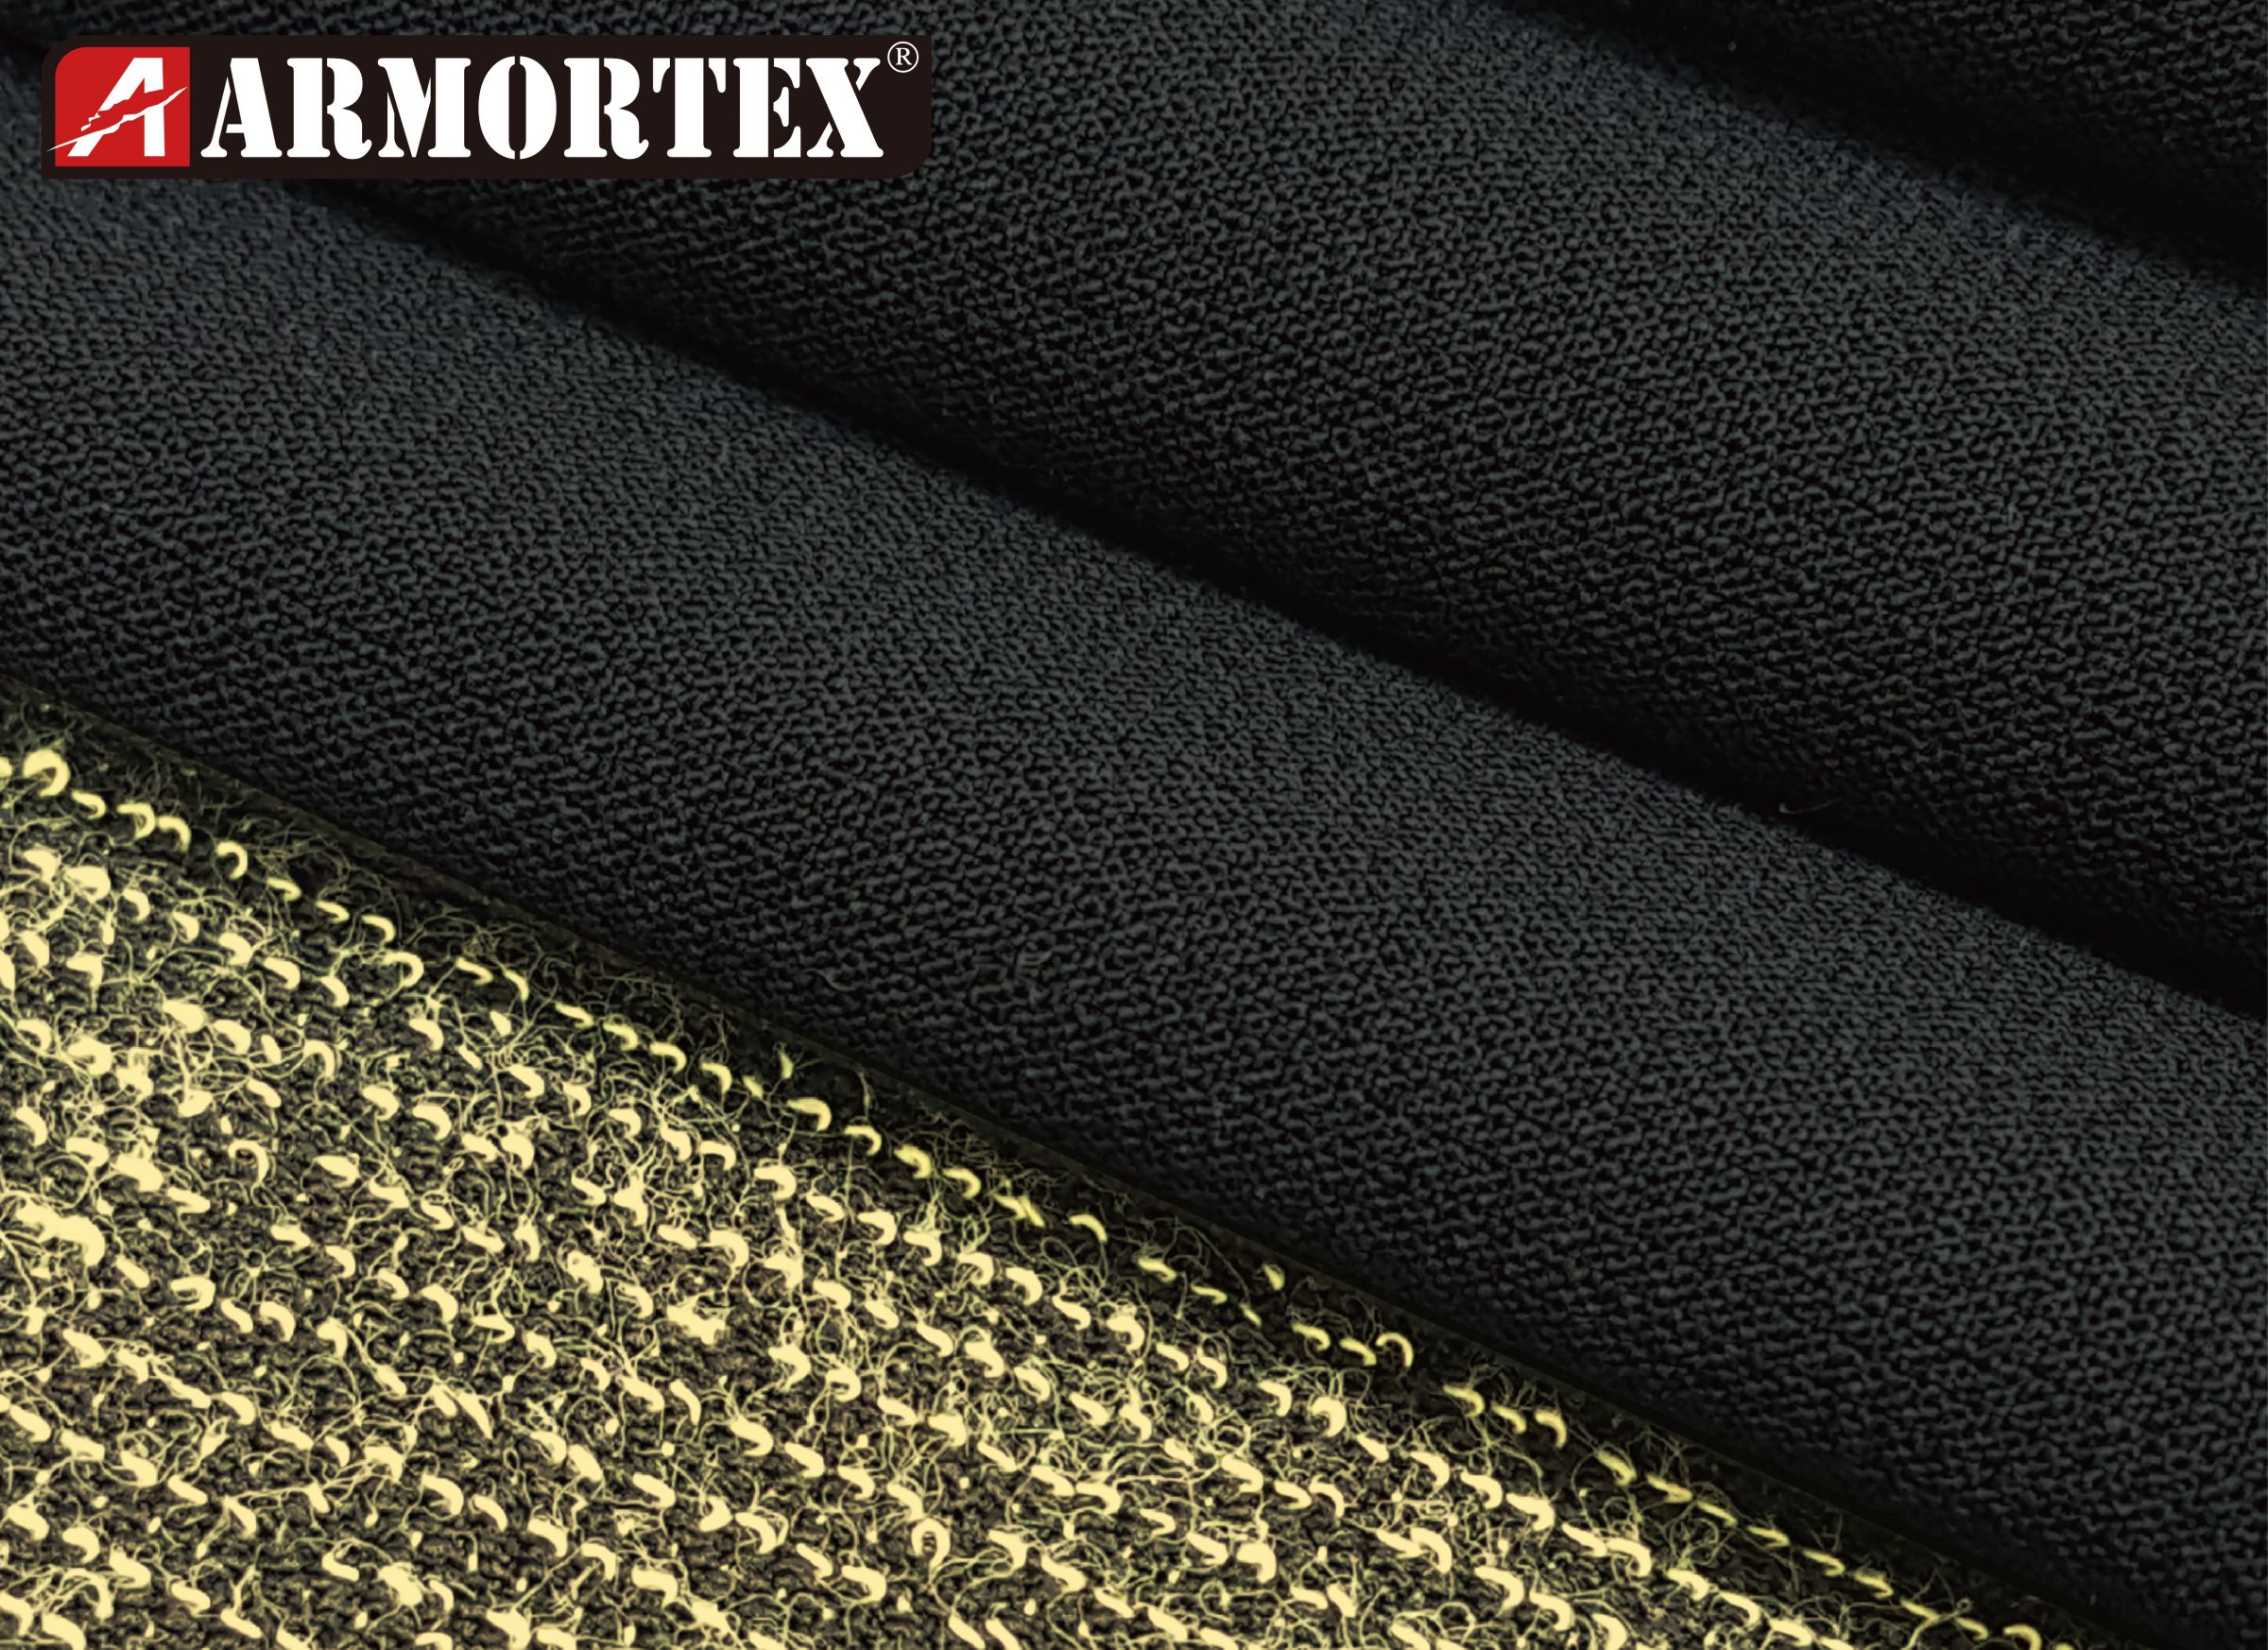 Discounted 4-Way Stretchable Abrasion Resistant Fabric Made With Kevlar®  Nylon - Kevlar® Abrasion Resistant Fabric, Made in Taiwan Textile Fabric  Manufacturer with ESG Reports